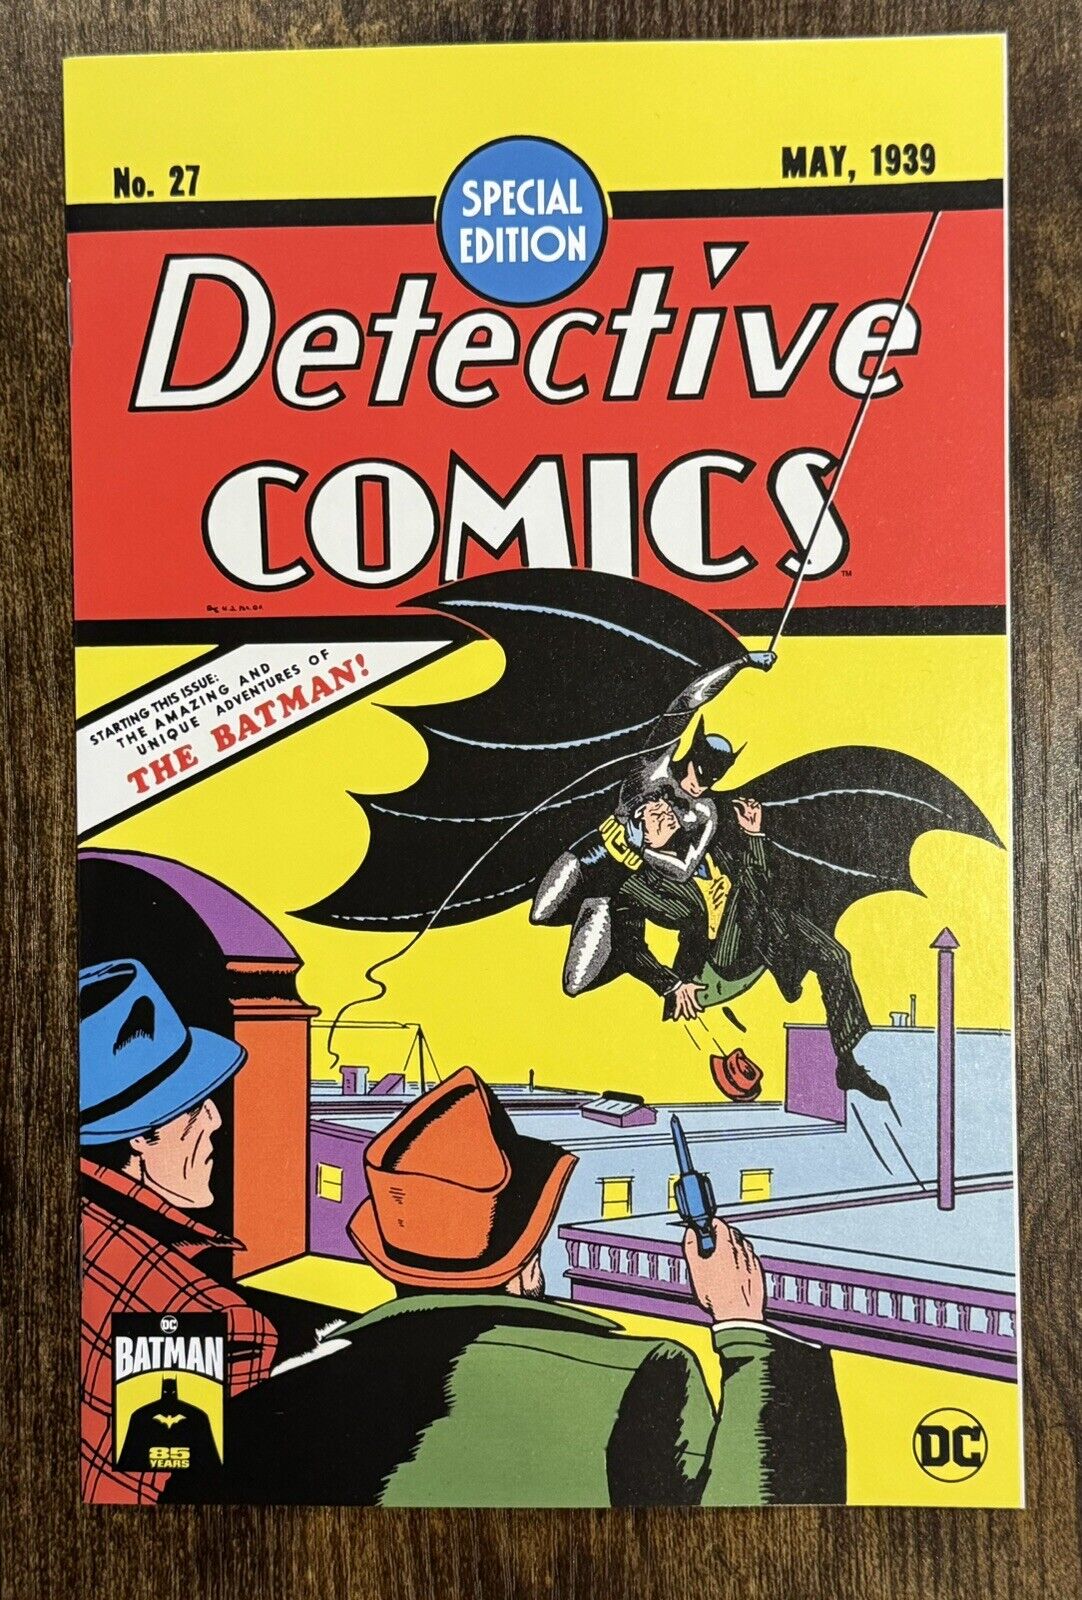 DETECTIVE COMICS #27 85th ANNIVERSARY SPECIAL EDITION New York NYC Giveaway NM-M